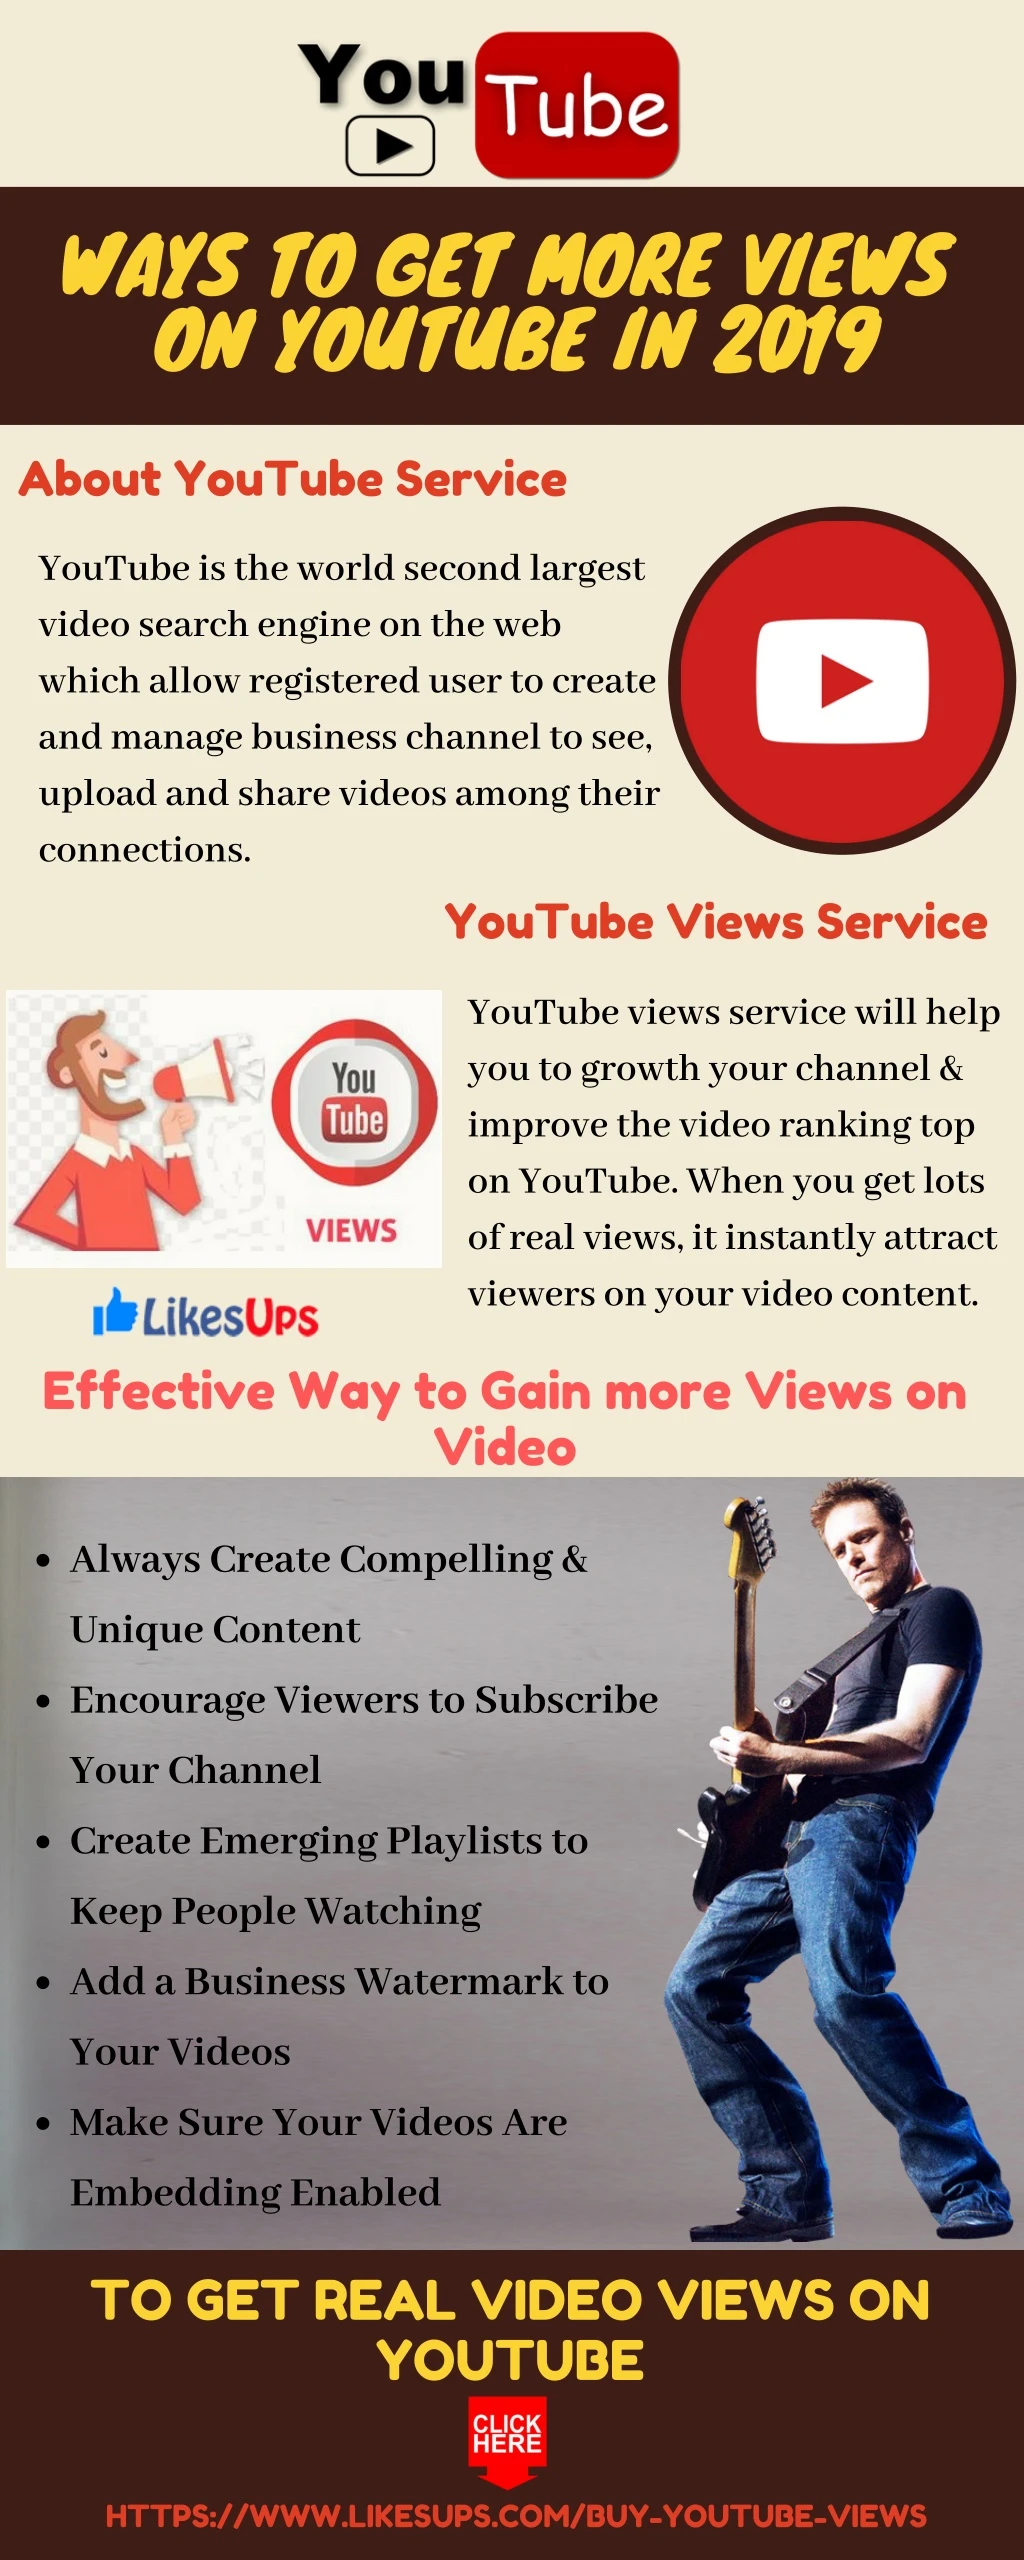 ways to get more views on youtube in 2019